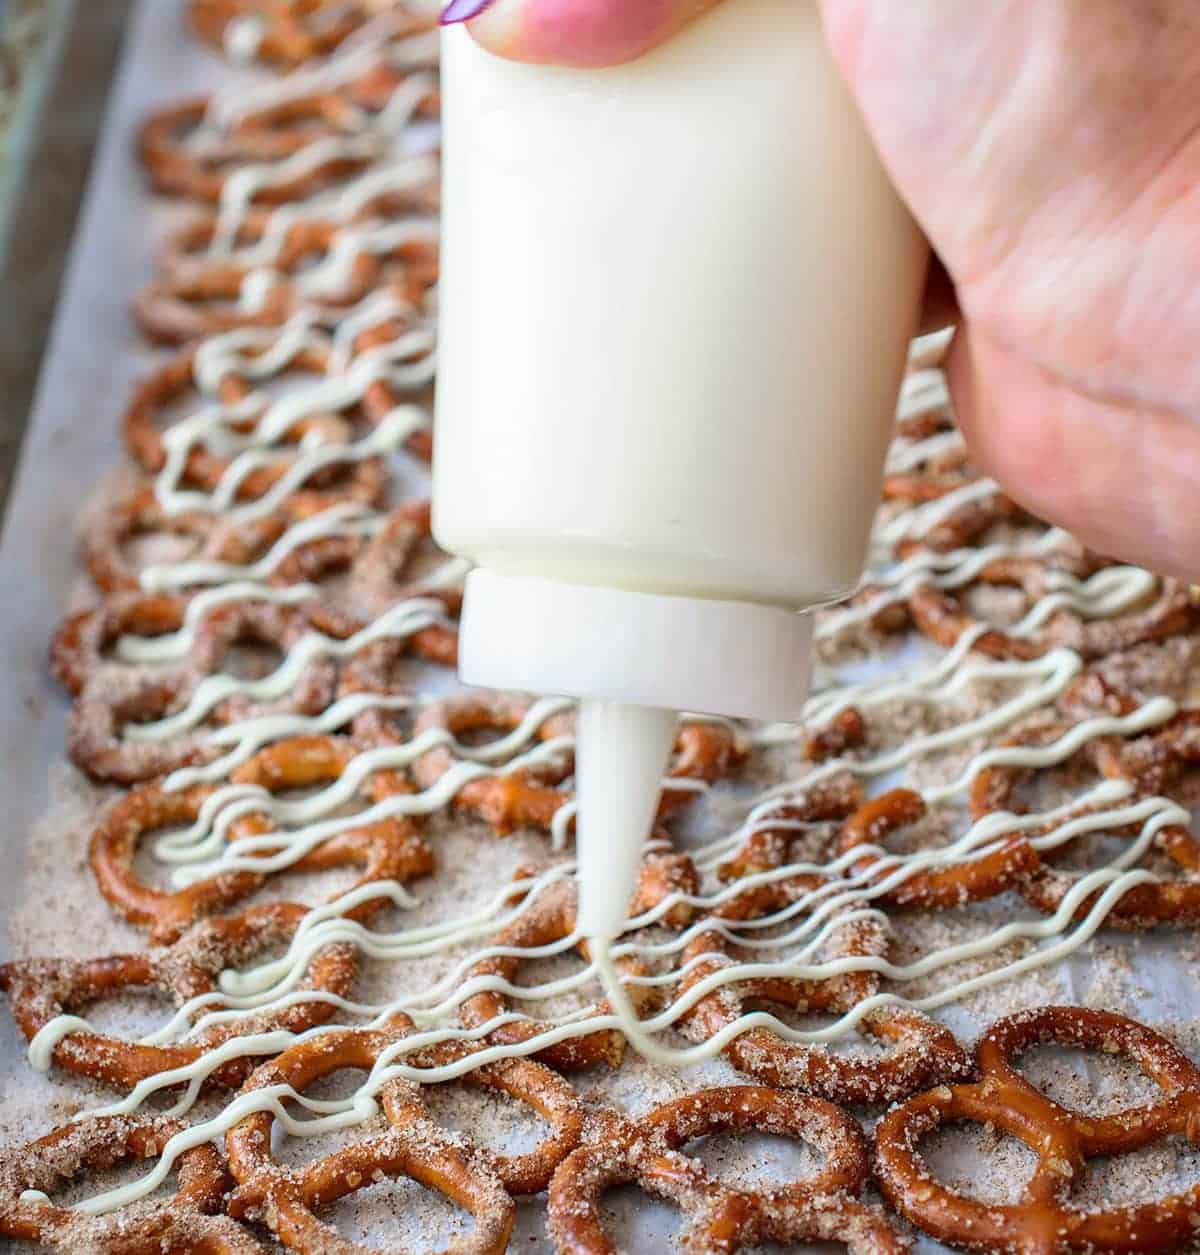 Cinnamon Sugar Pretzels with white chocolate being drizzled using a candy bottle to make perfect stripes.